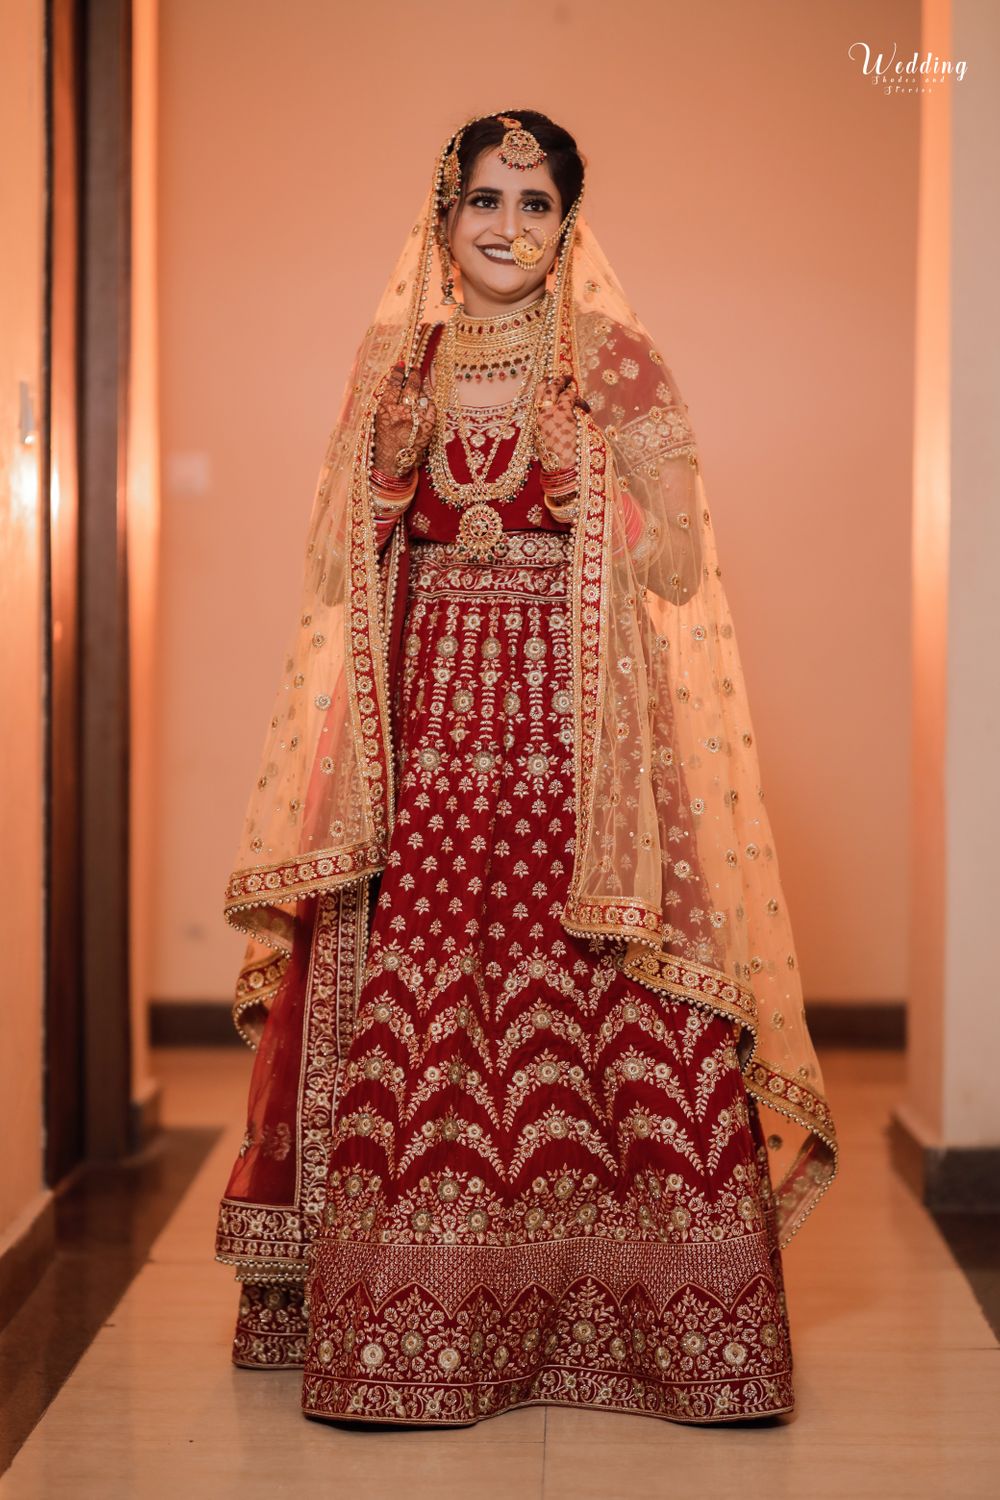 Photo From Neha Wedding - By Wedding Shades and Stories